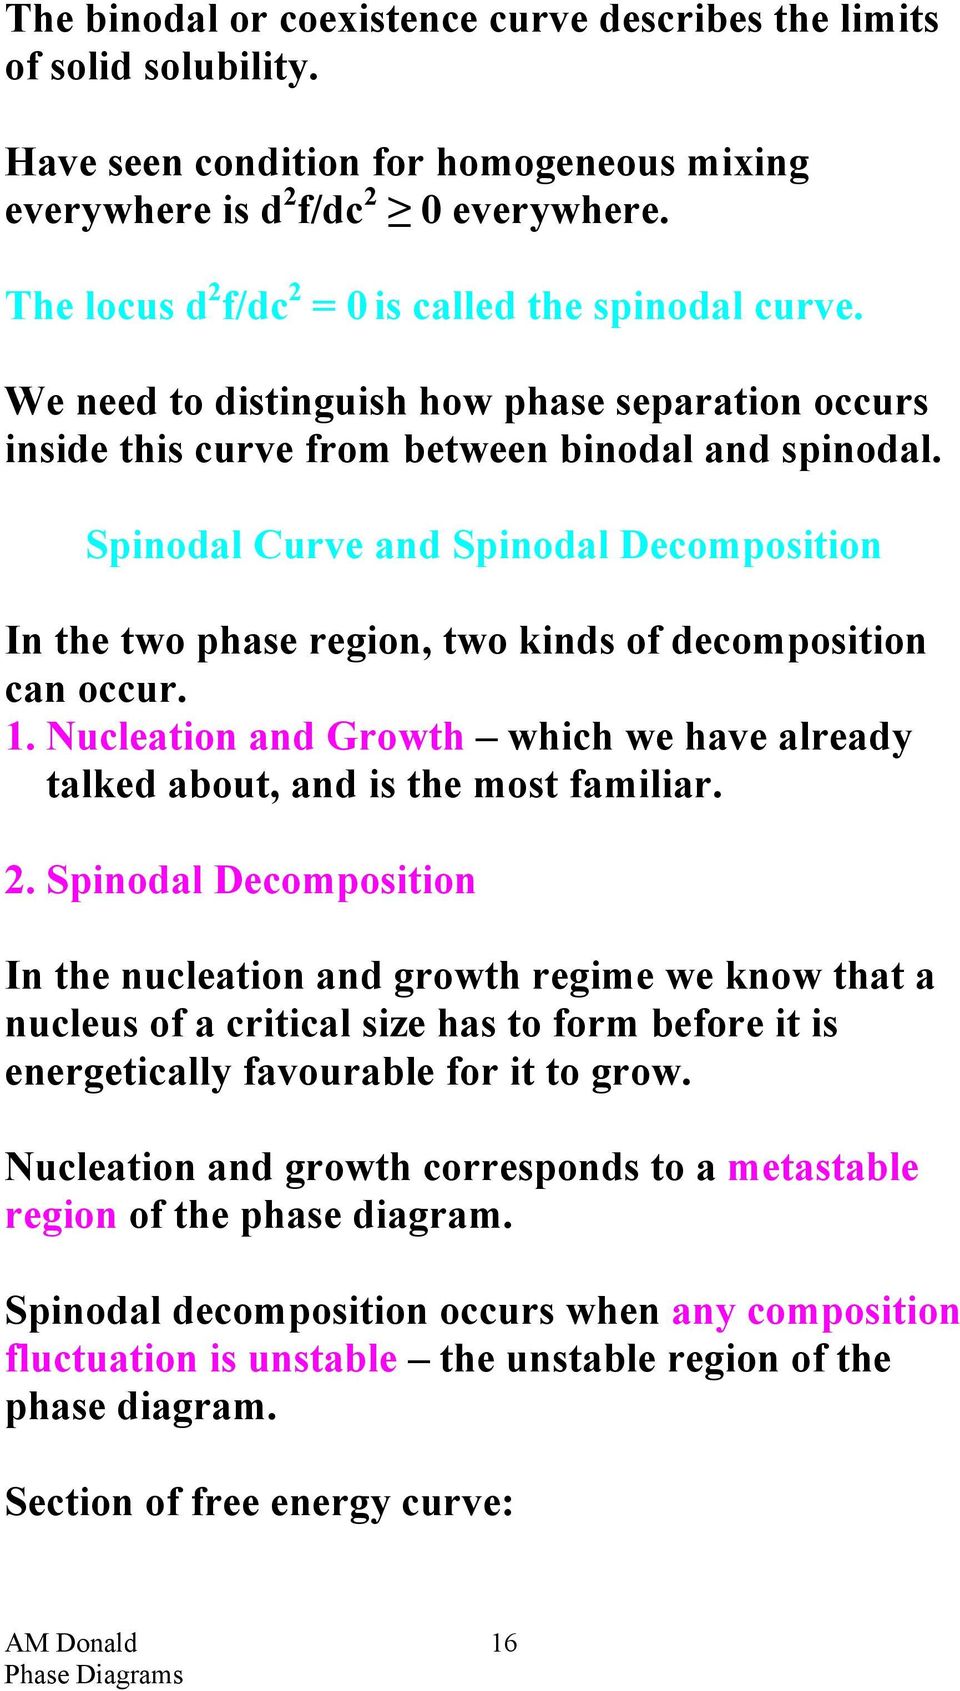 Spinodal Curve and Spinodal Decomposition In the two phase region, two kinds of decomposition can occur. 1. Nucleation and Growth which we have already talked about, and is the most familiar. 2.